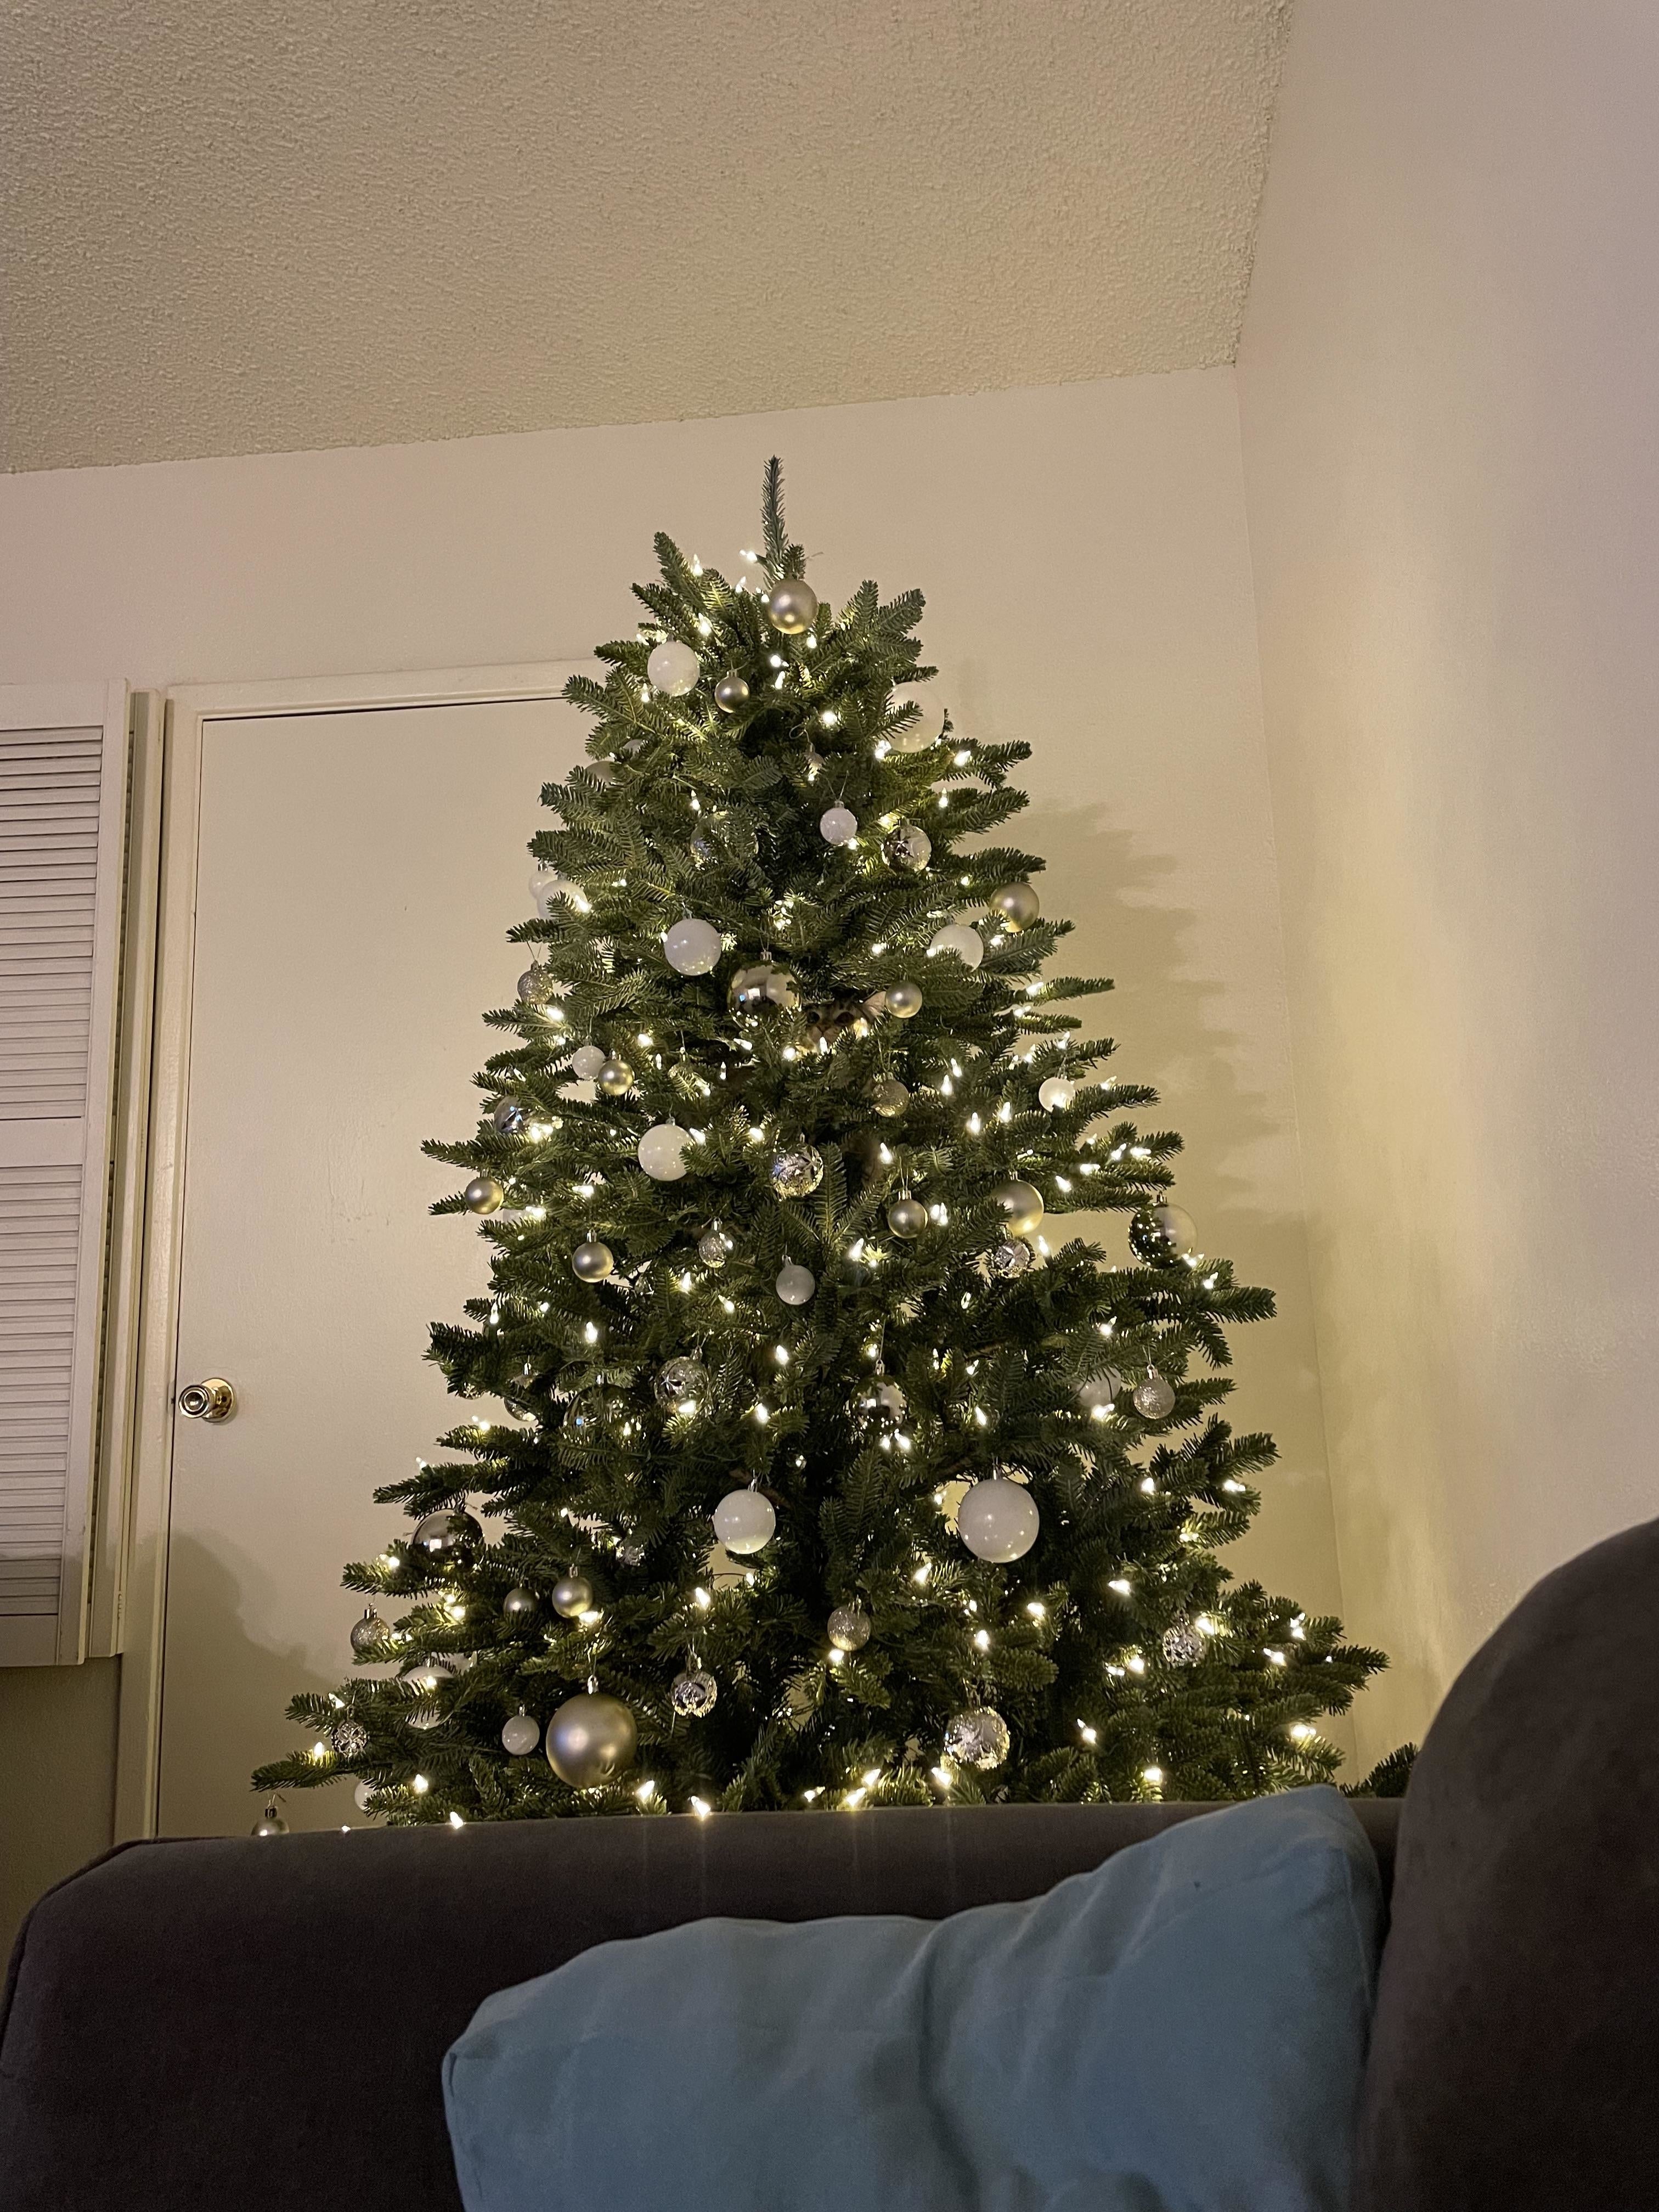 A decorated Christmas tree with lights and ornaments stands in a living room next to a closed door. A section of a sofa with a blue pillow is visible in the foreground